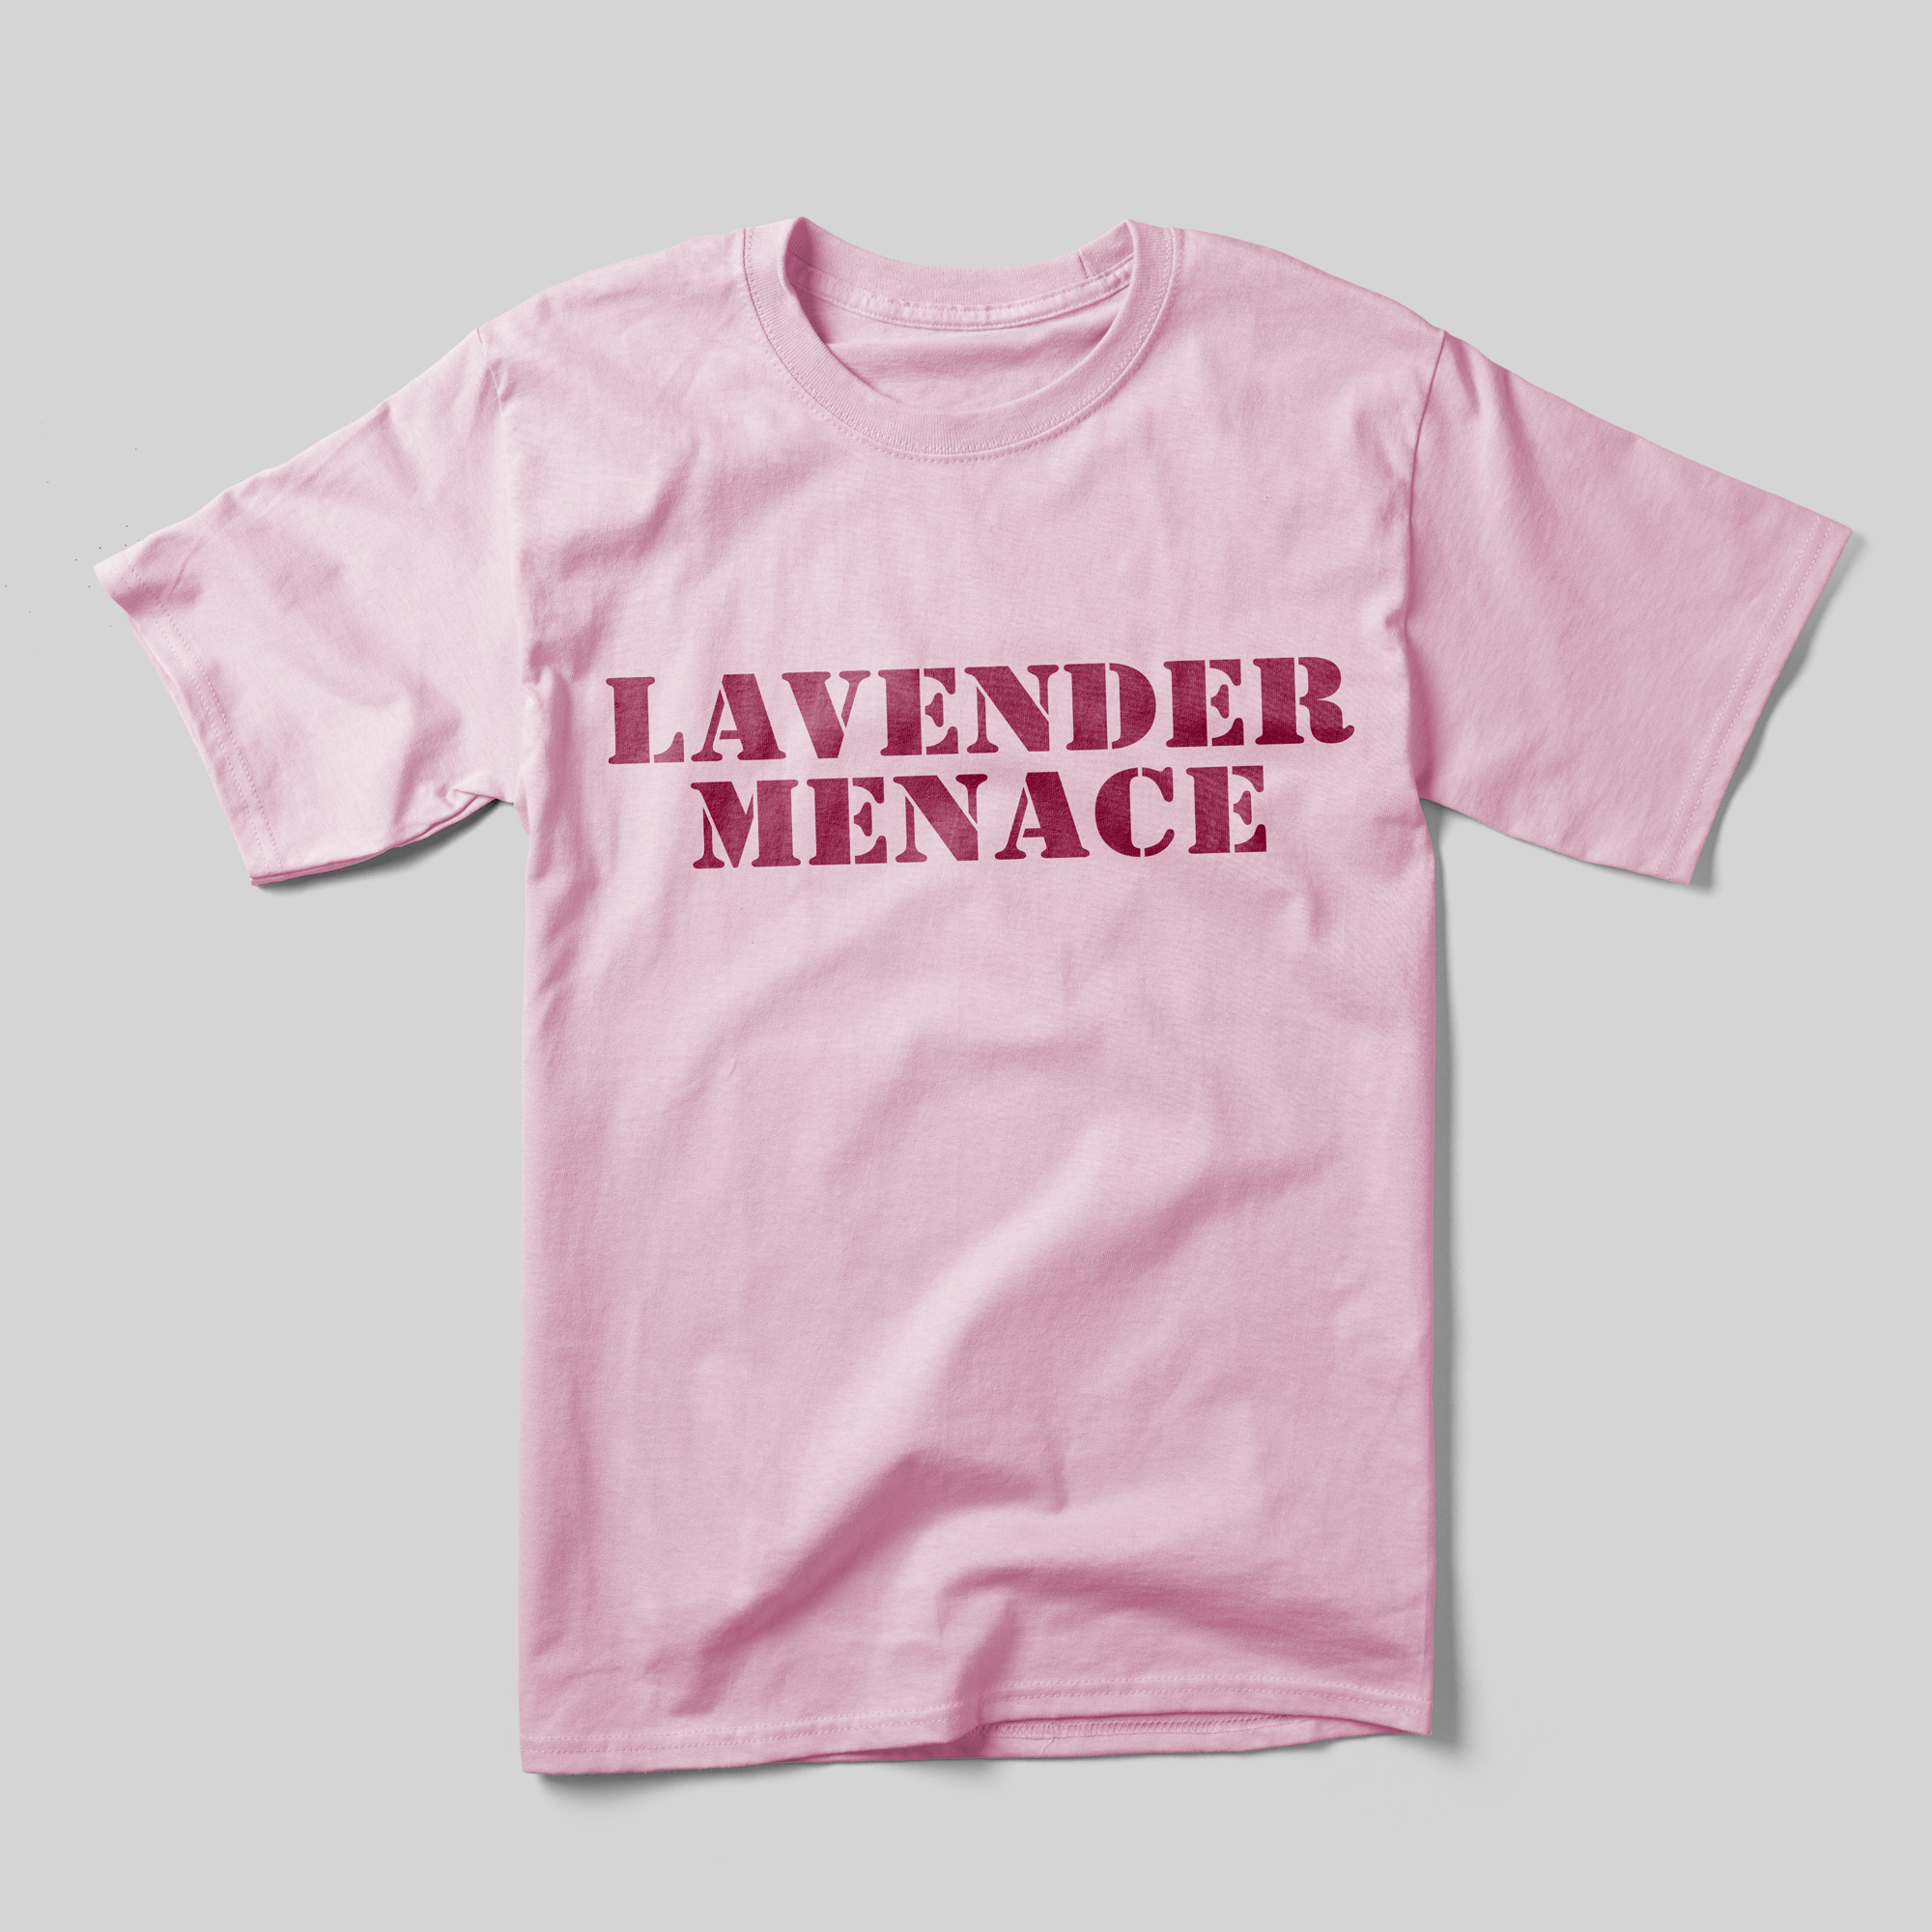 A pink t-shirt that reads "Lavender Menace" in red text.